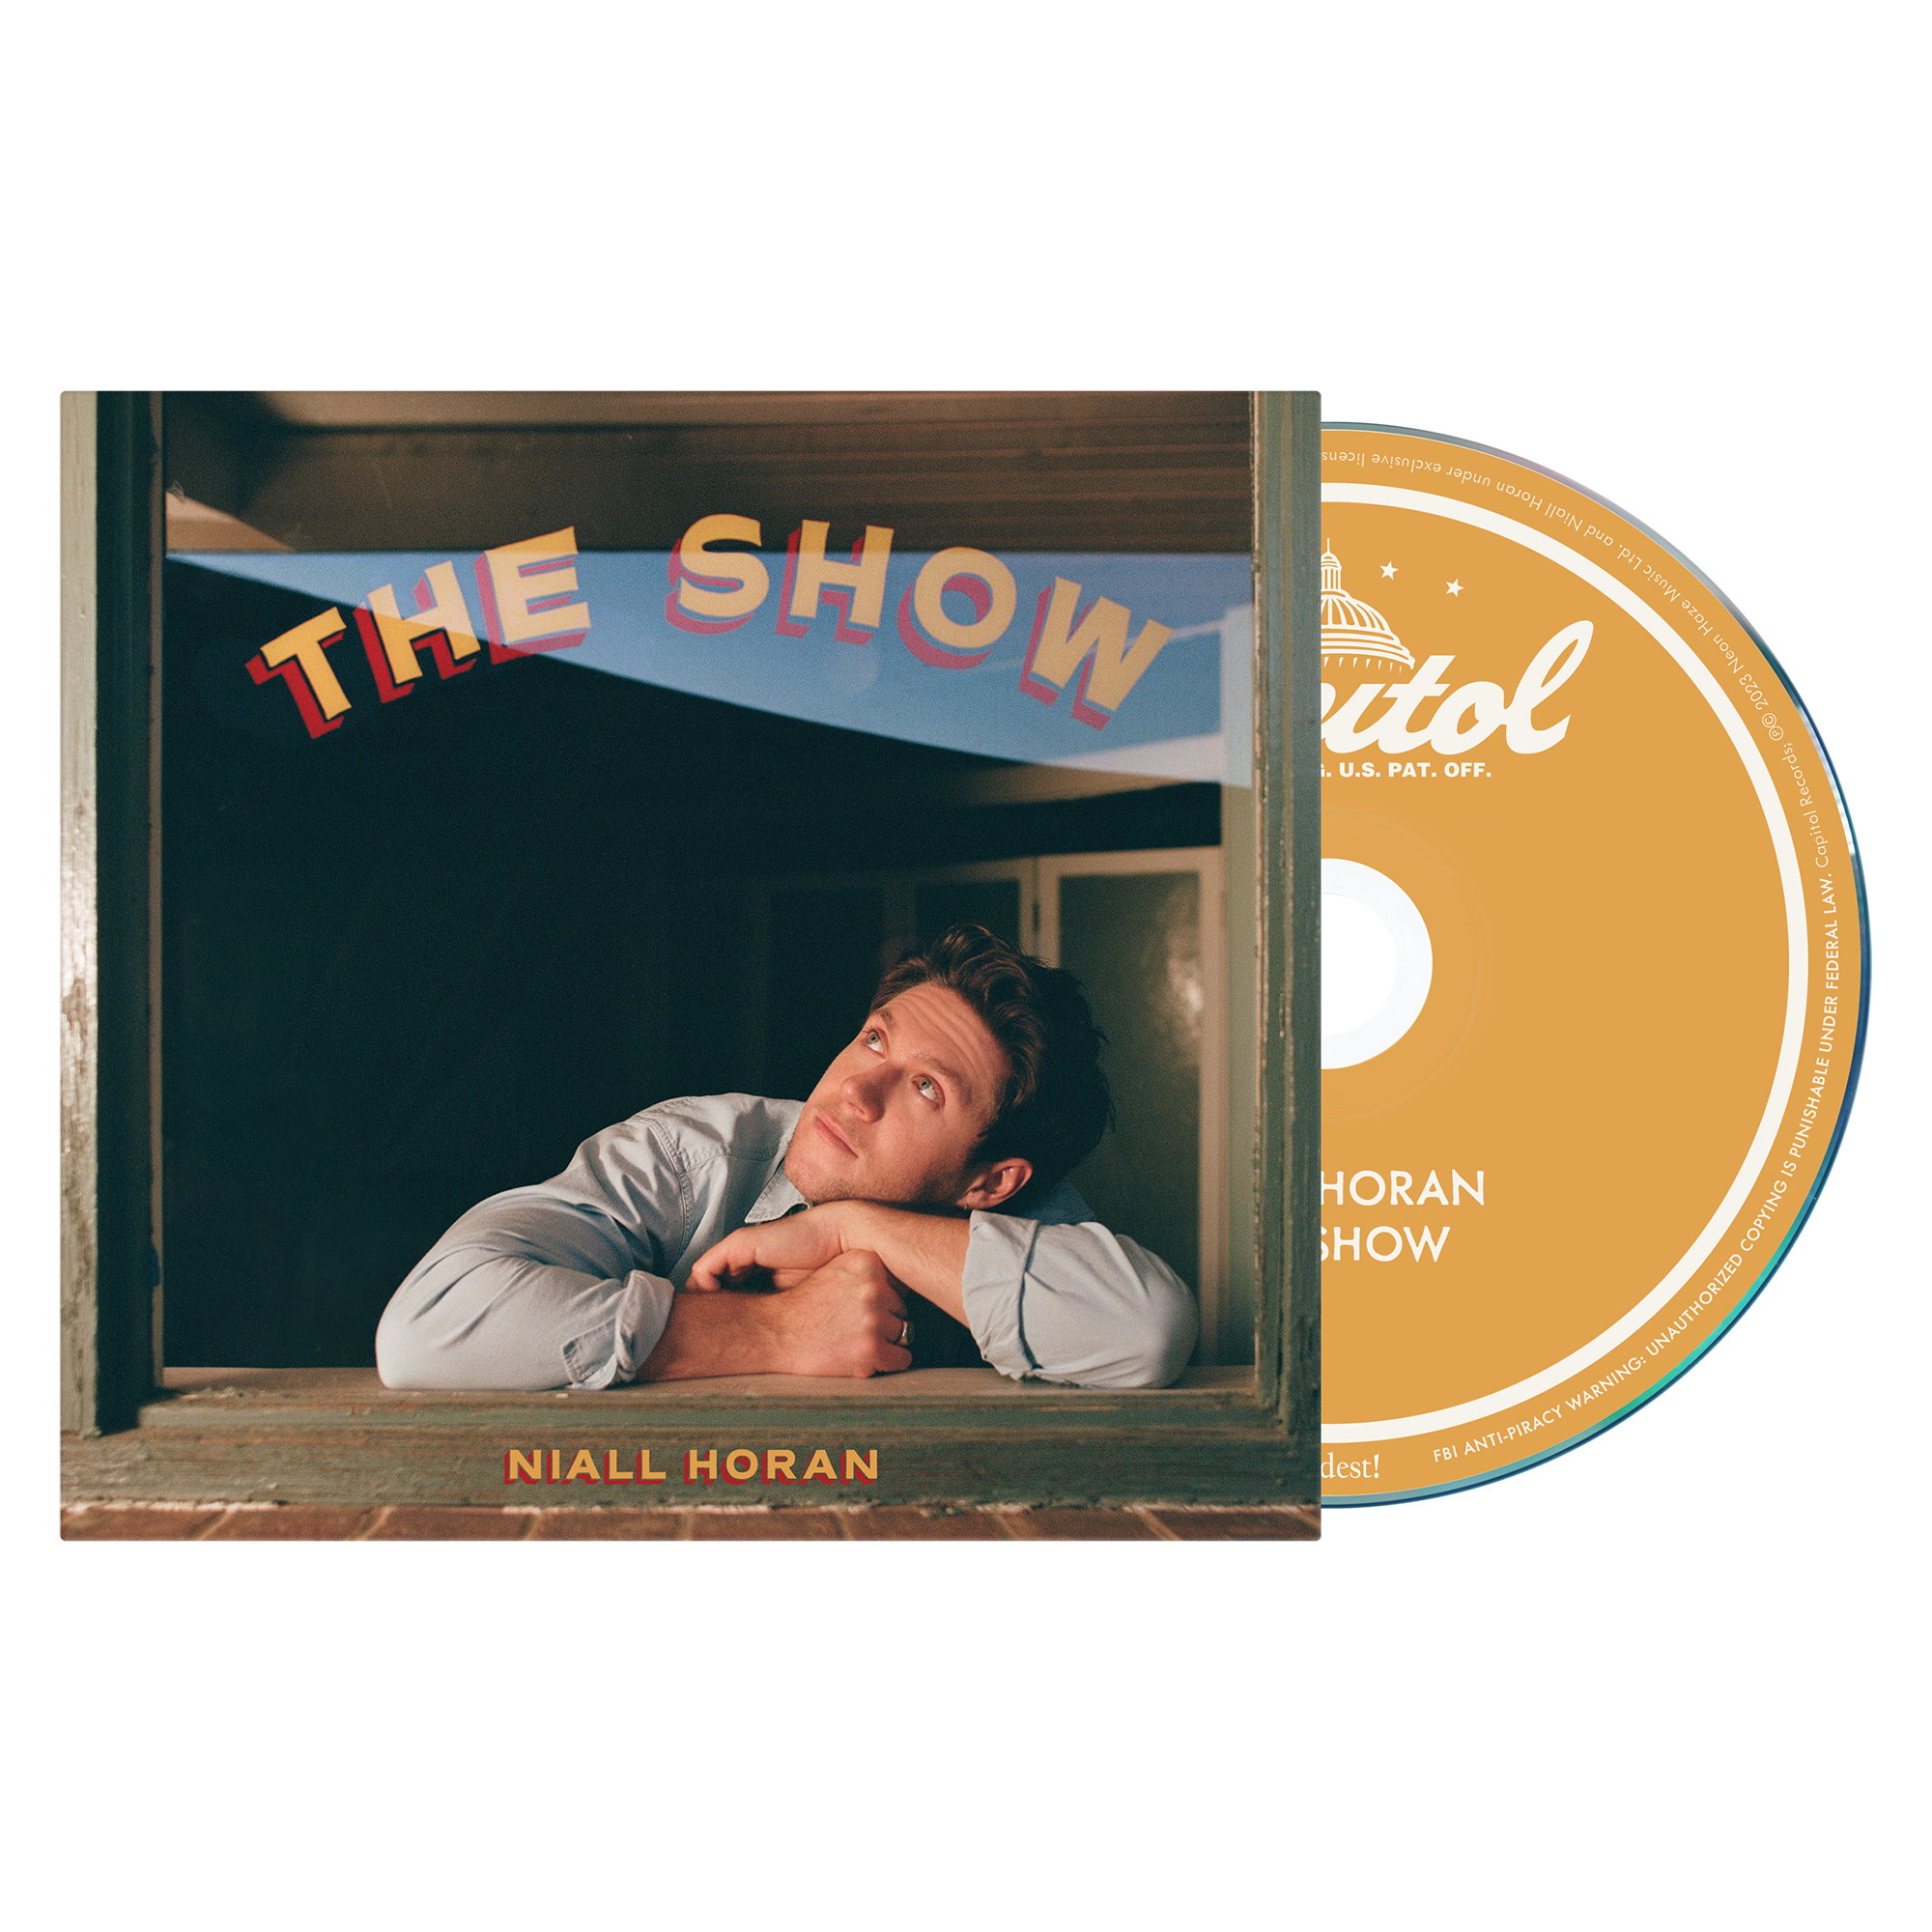 Niall Horan - The Show CD